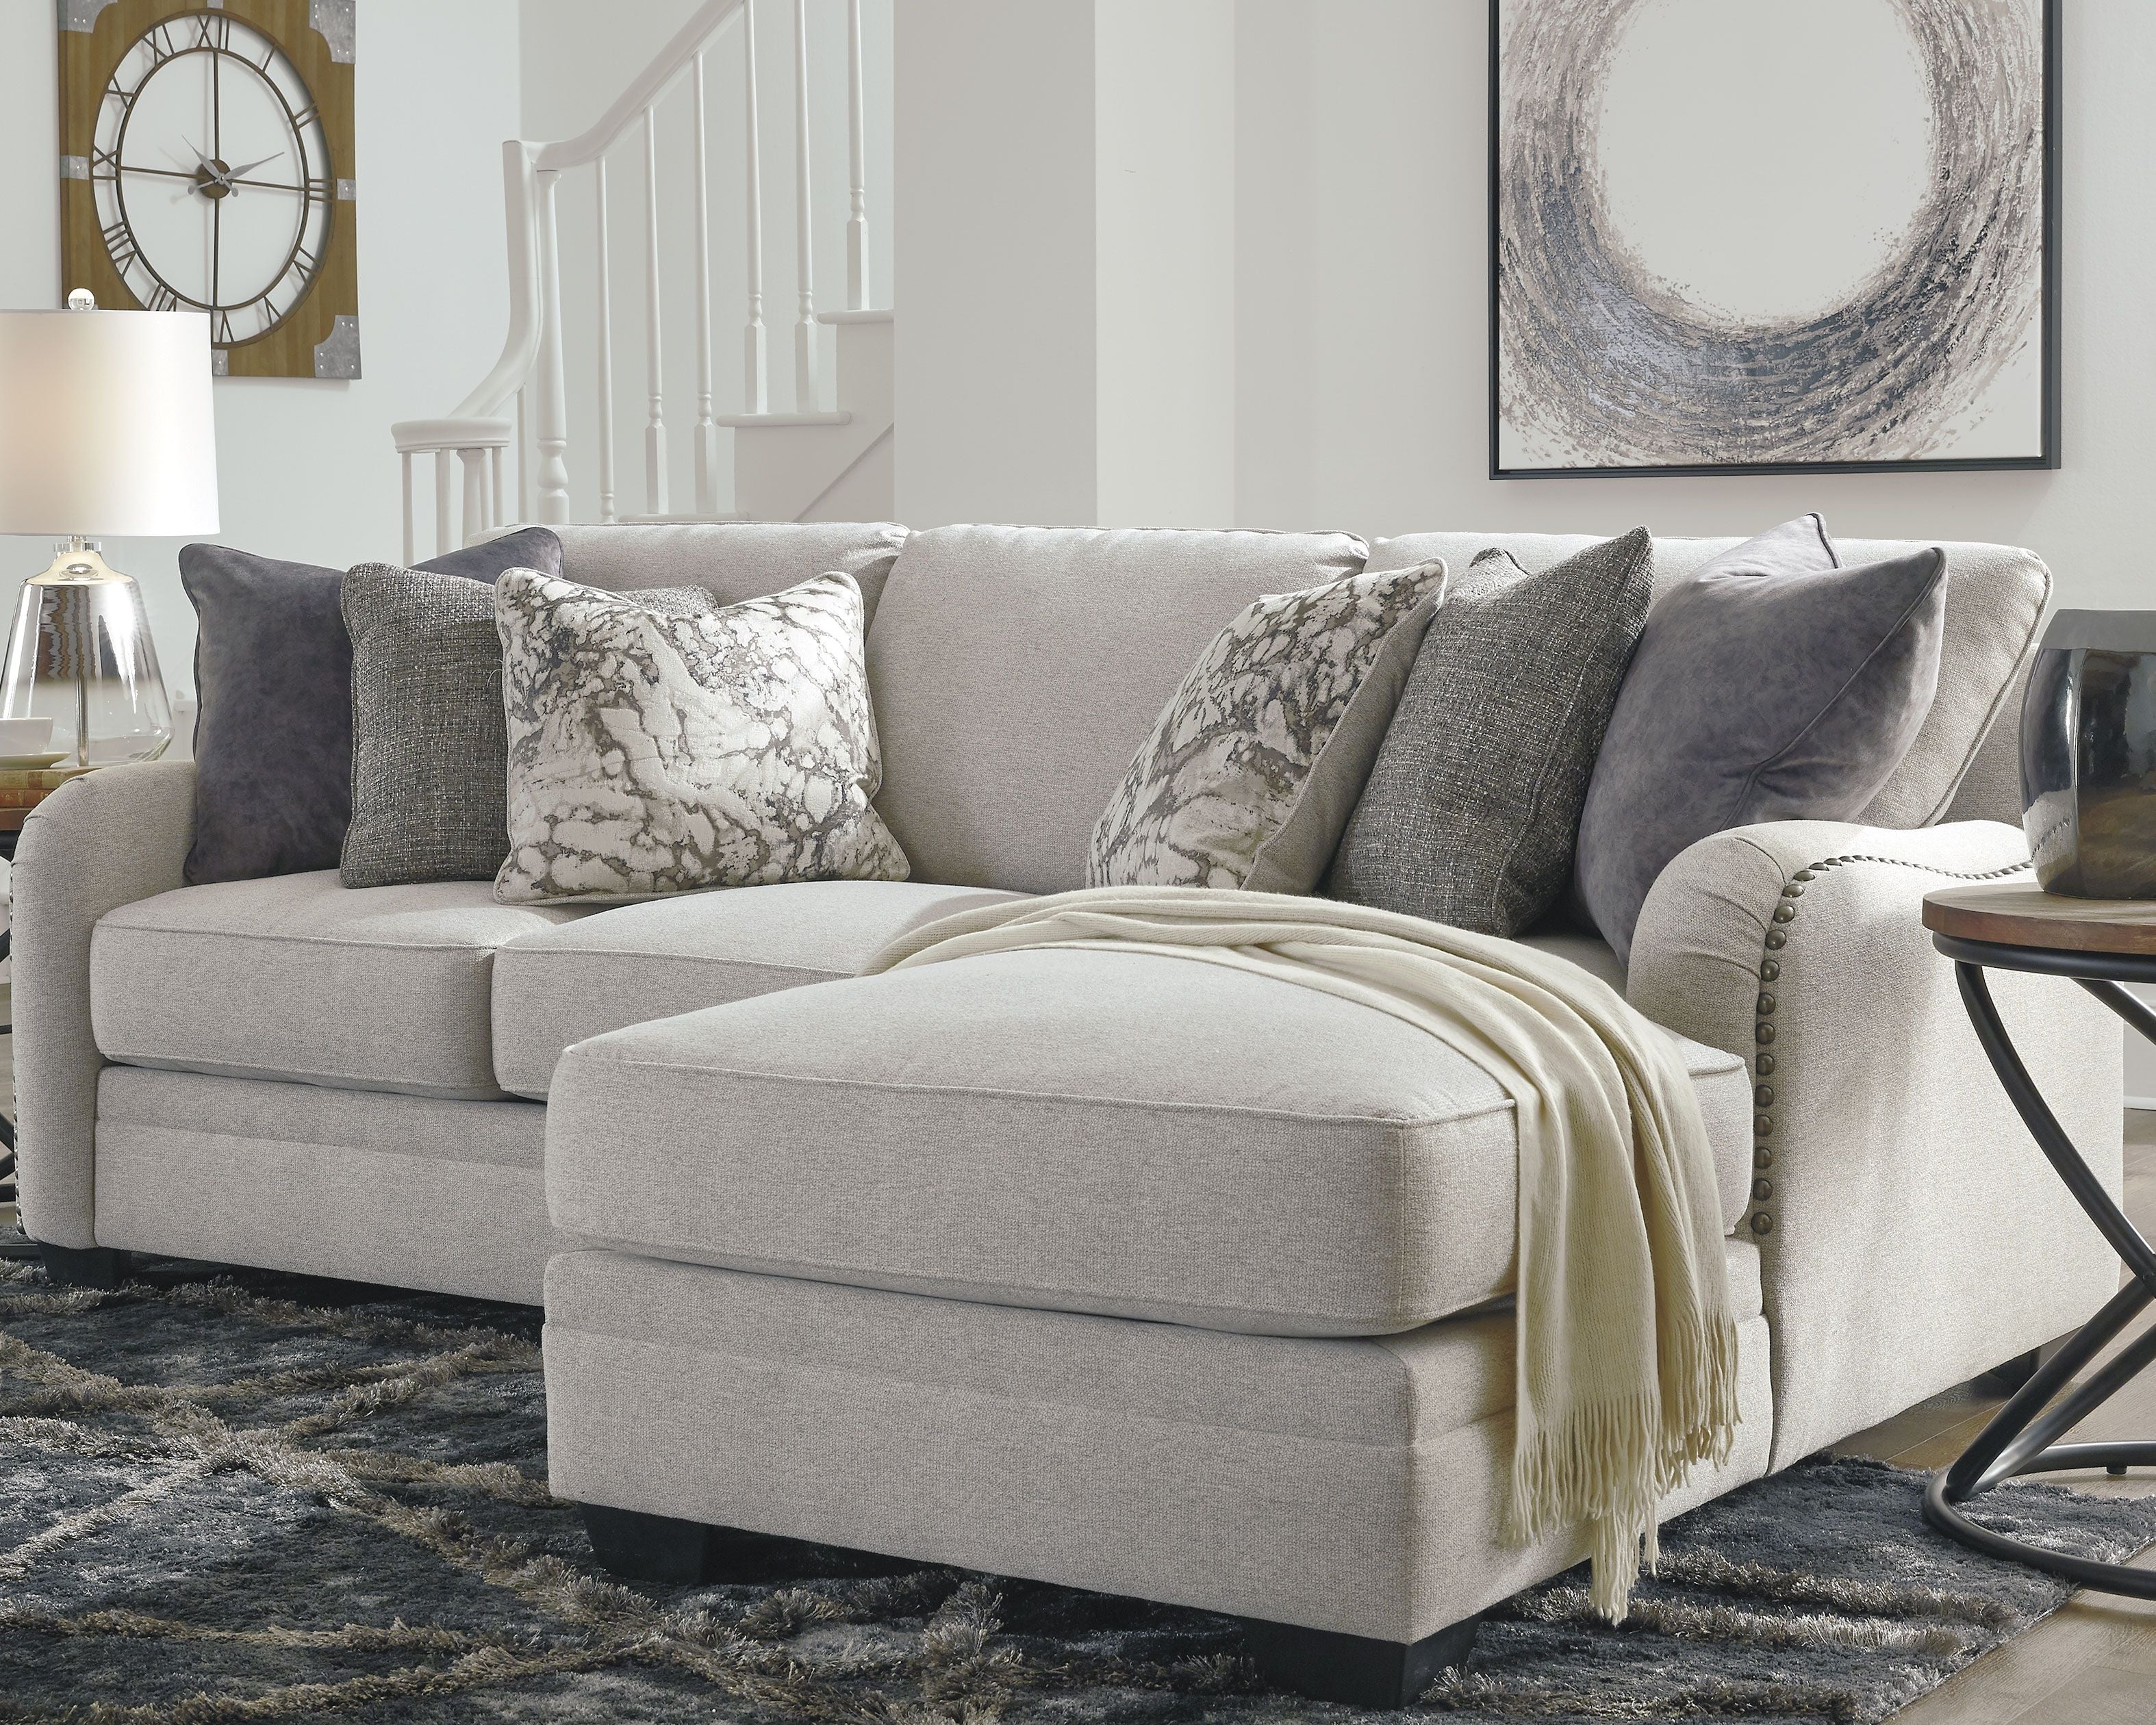 Signature Design by Ashley Dellara Gray Sectional - Transitional, Chic, Comfy